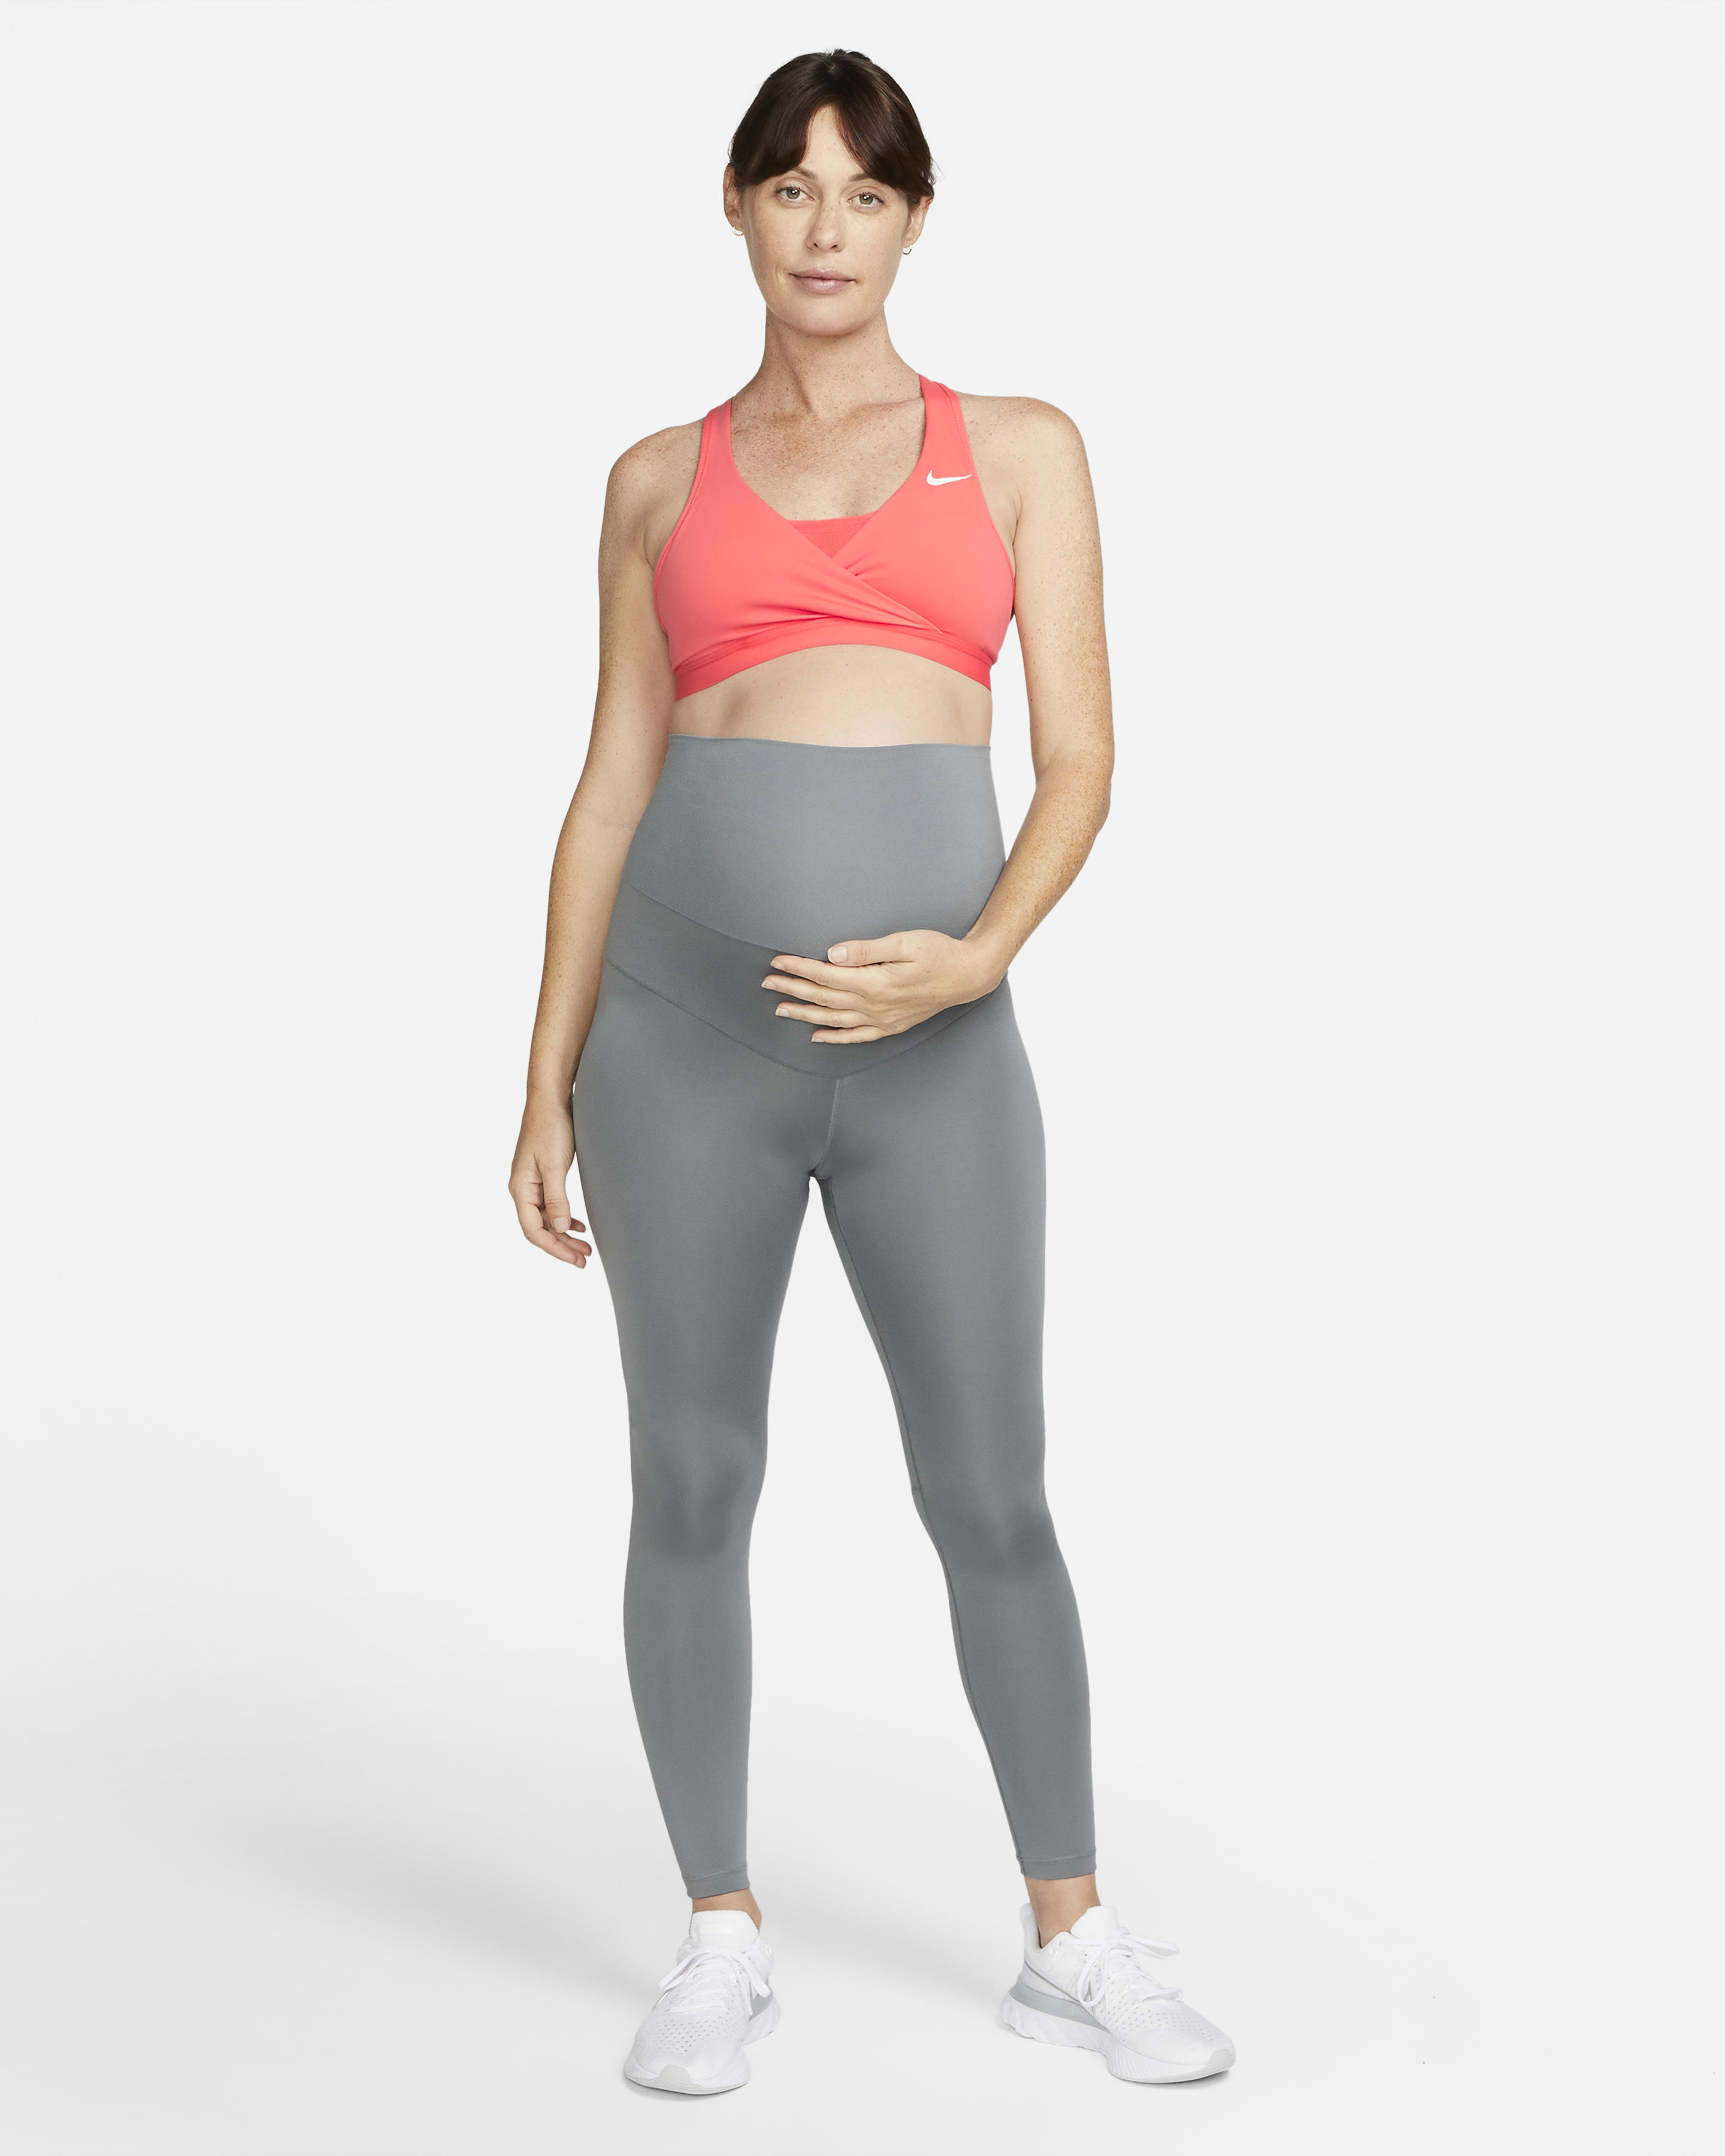 Maternity Activewear: Staying Fit & Fashionable During Pregnancy